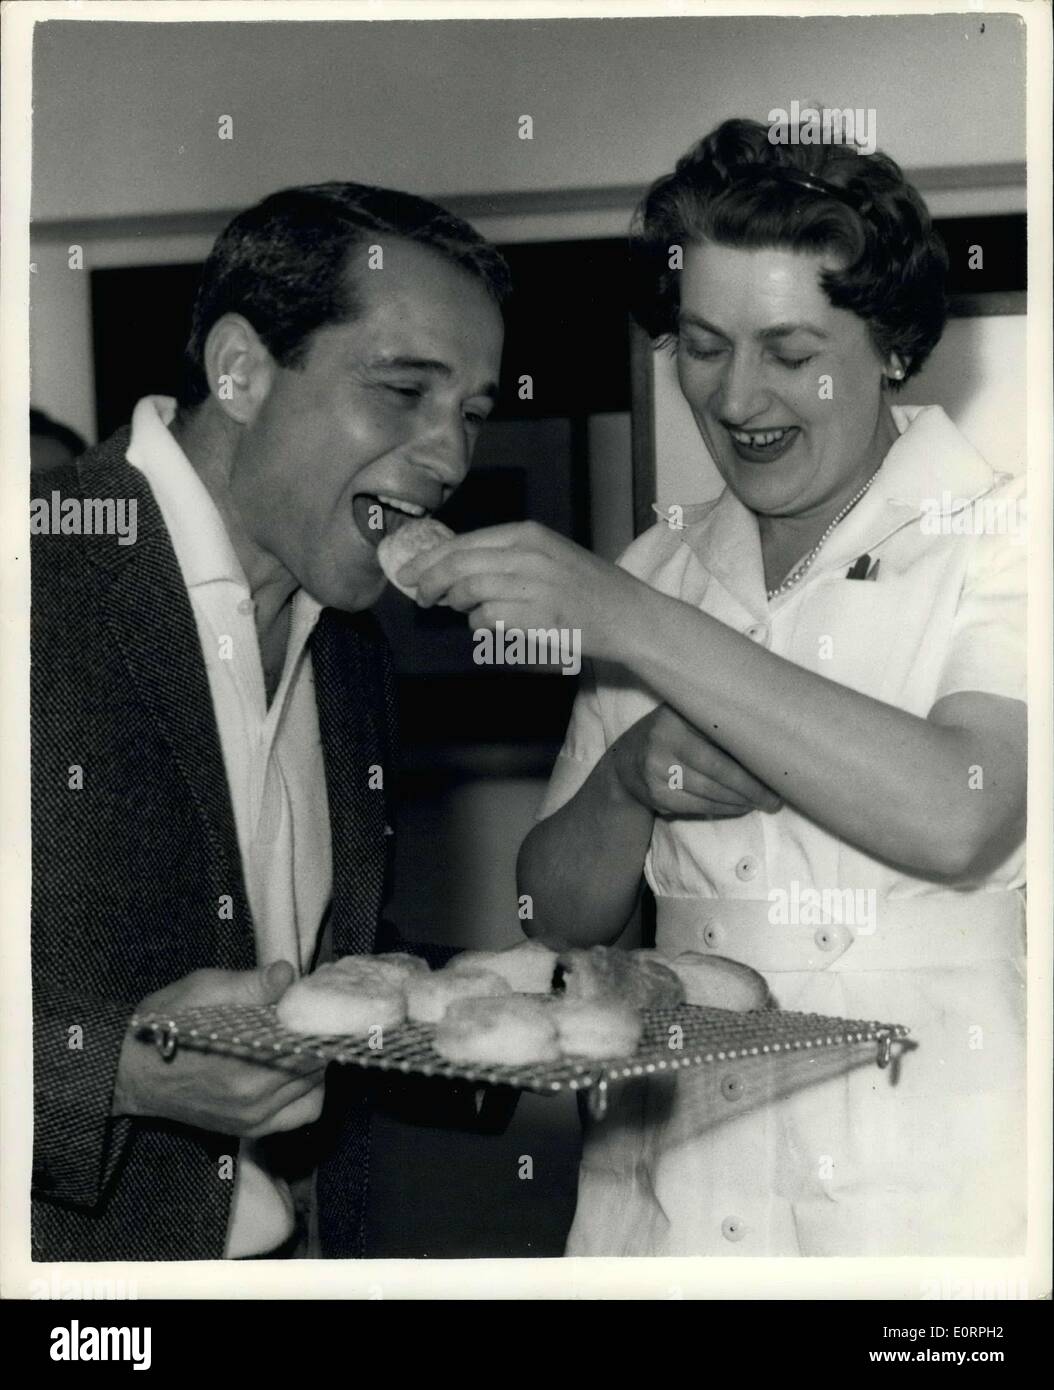 Apr. 22, 1960 - Perry Como Tours Offices Of The Kraft Company In London: Perry Como-who is said to be the world's highest paid TV star-this afternoon paid a visit to the Marylebone Offices of the Kraft Company-the company which sponsors his shows. Photo shows. Perry Como tries out a scone prepared by Mary Tracey of Helenborough, near Glasgow-who is the Company's chief experimental Cook-at the offices this afternoon. Stock Photo